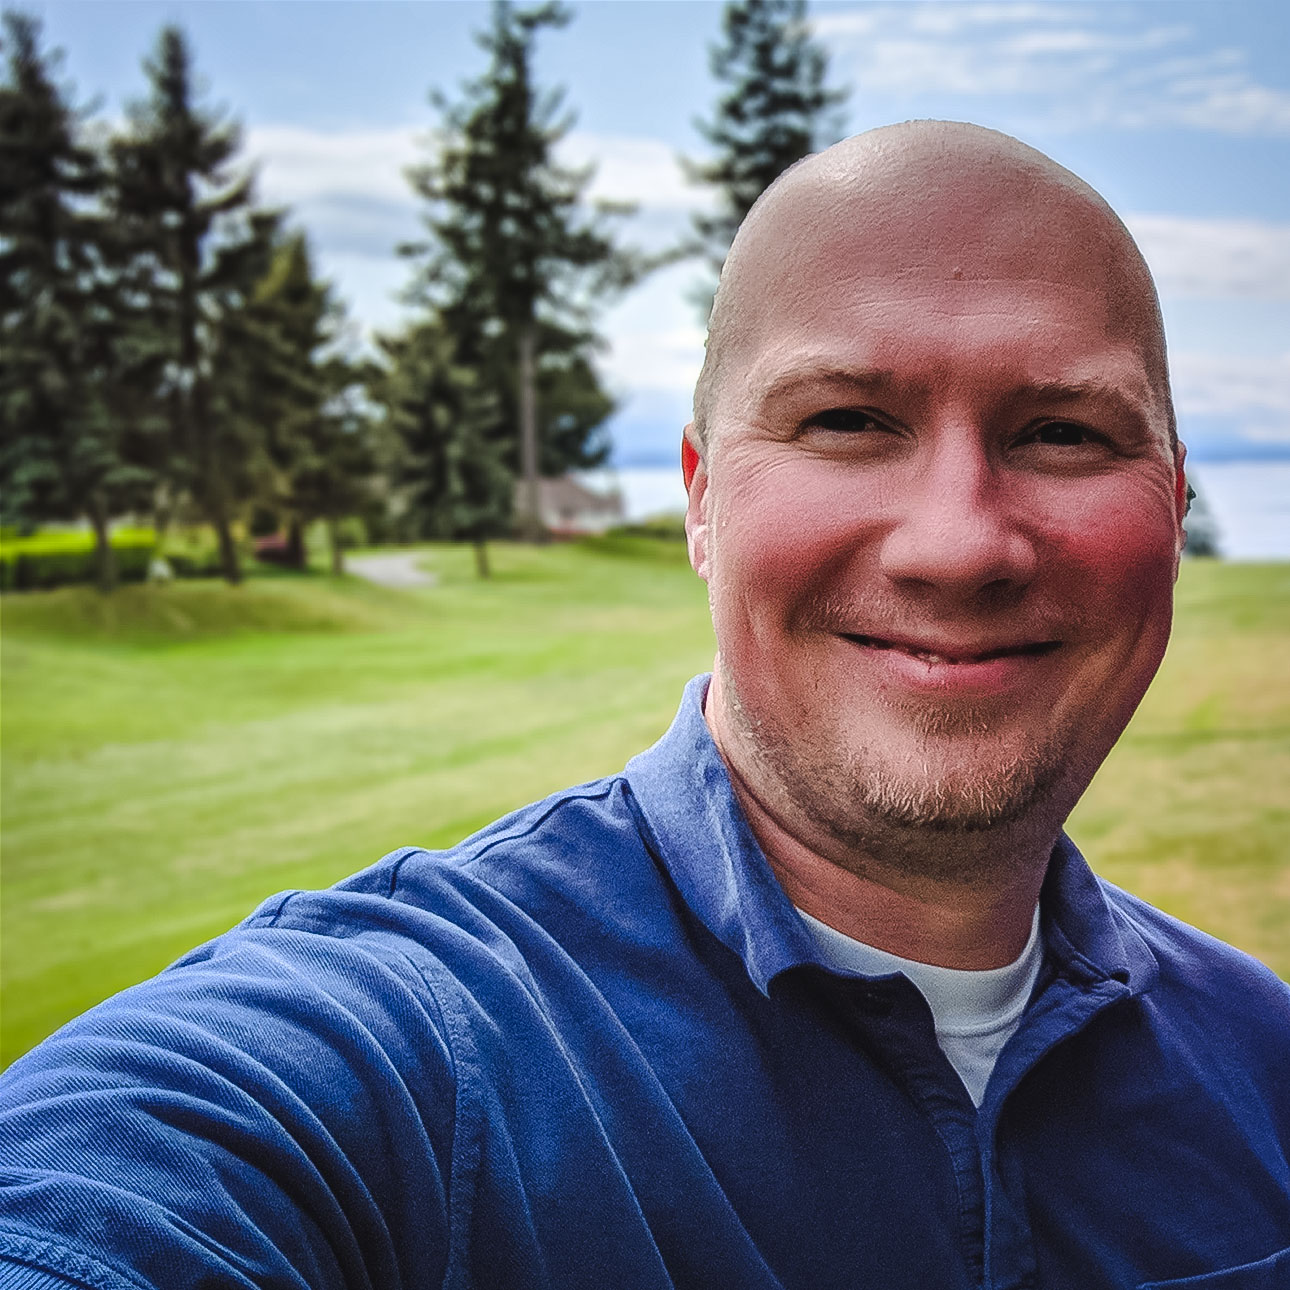 A smiling bald person wearing a blue shirt posing in a gold course